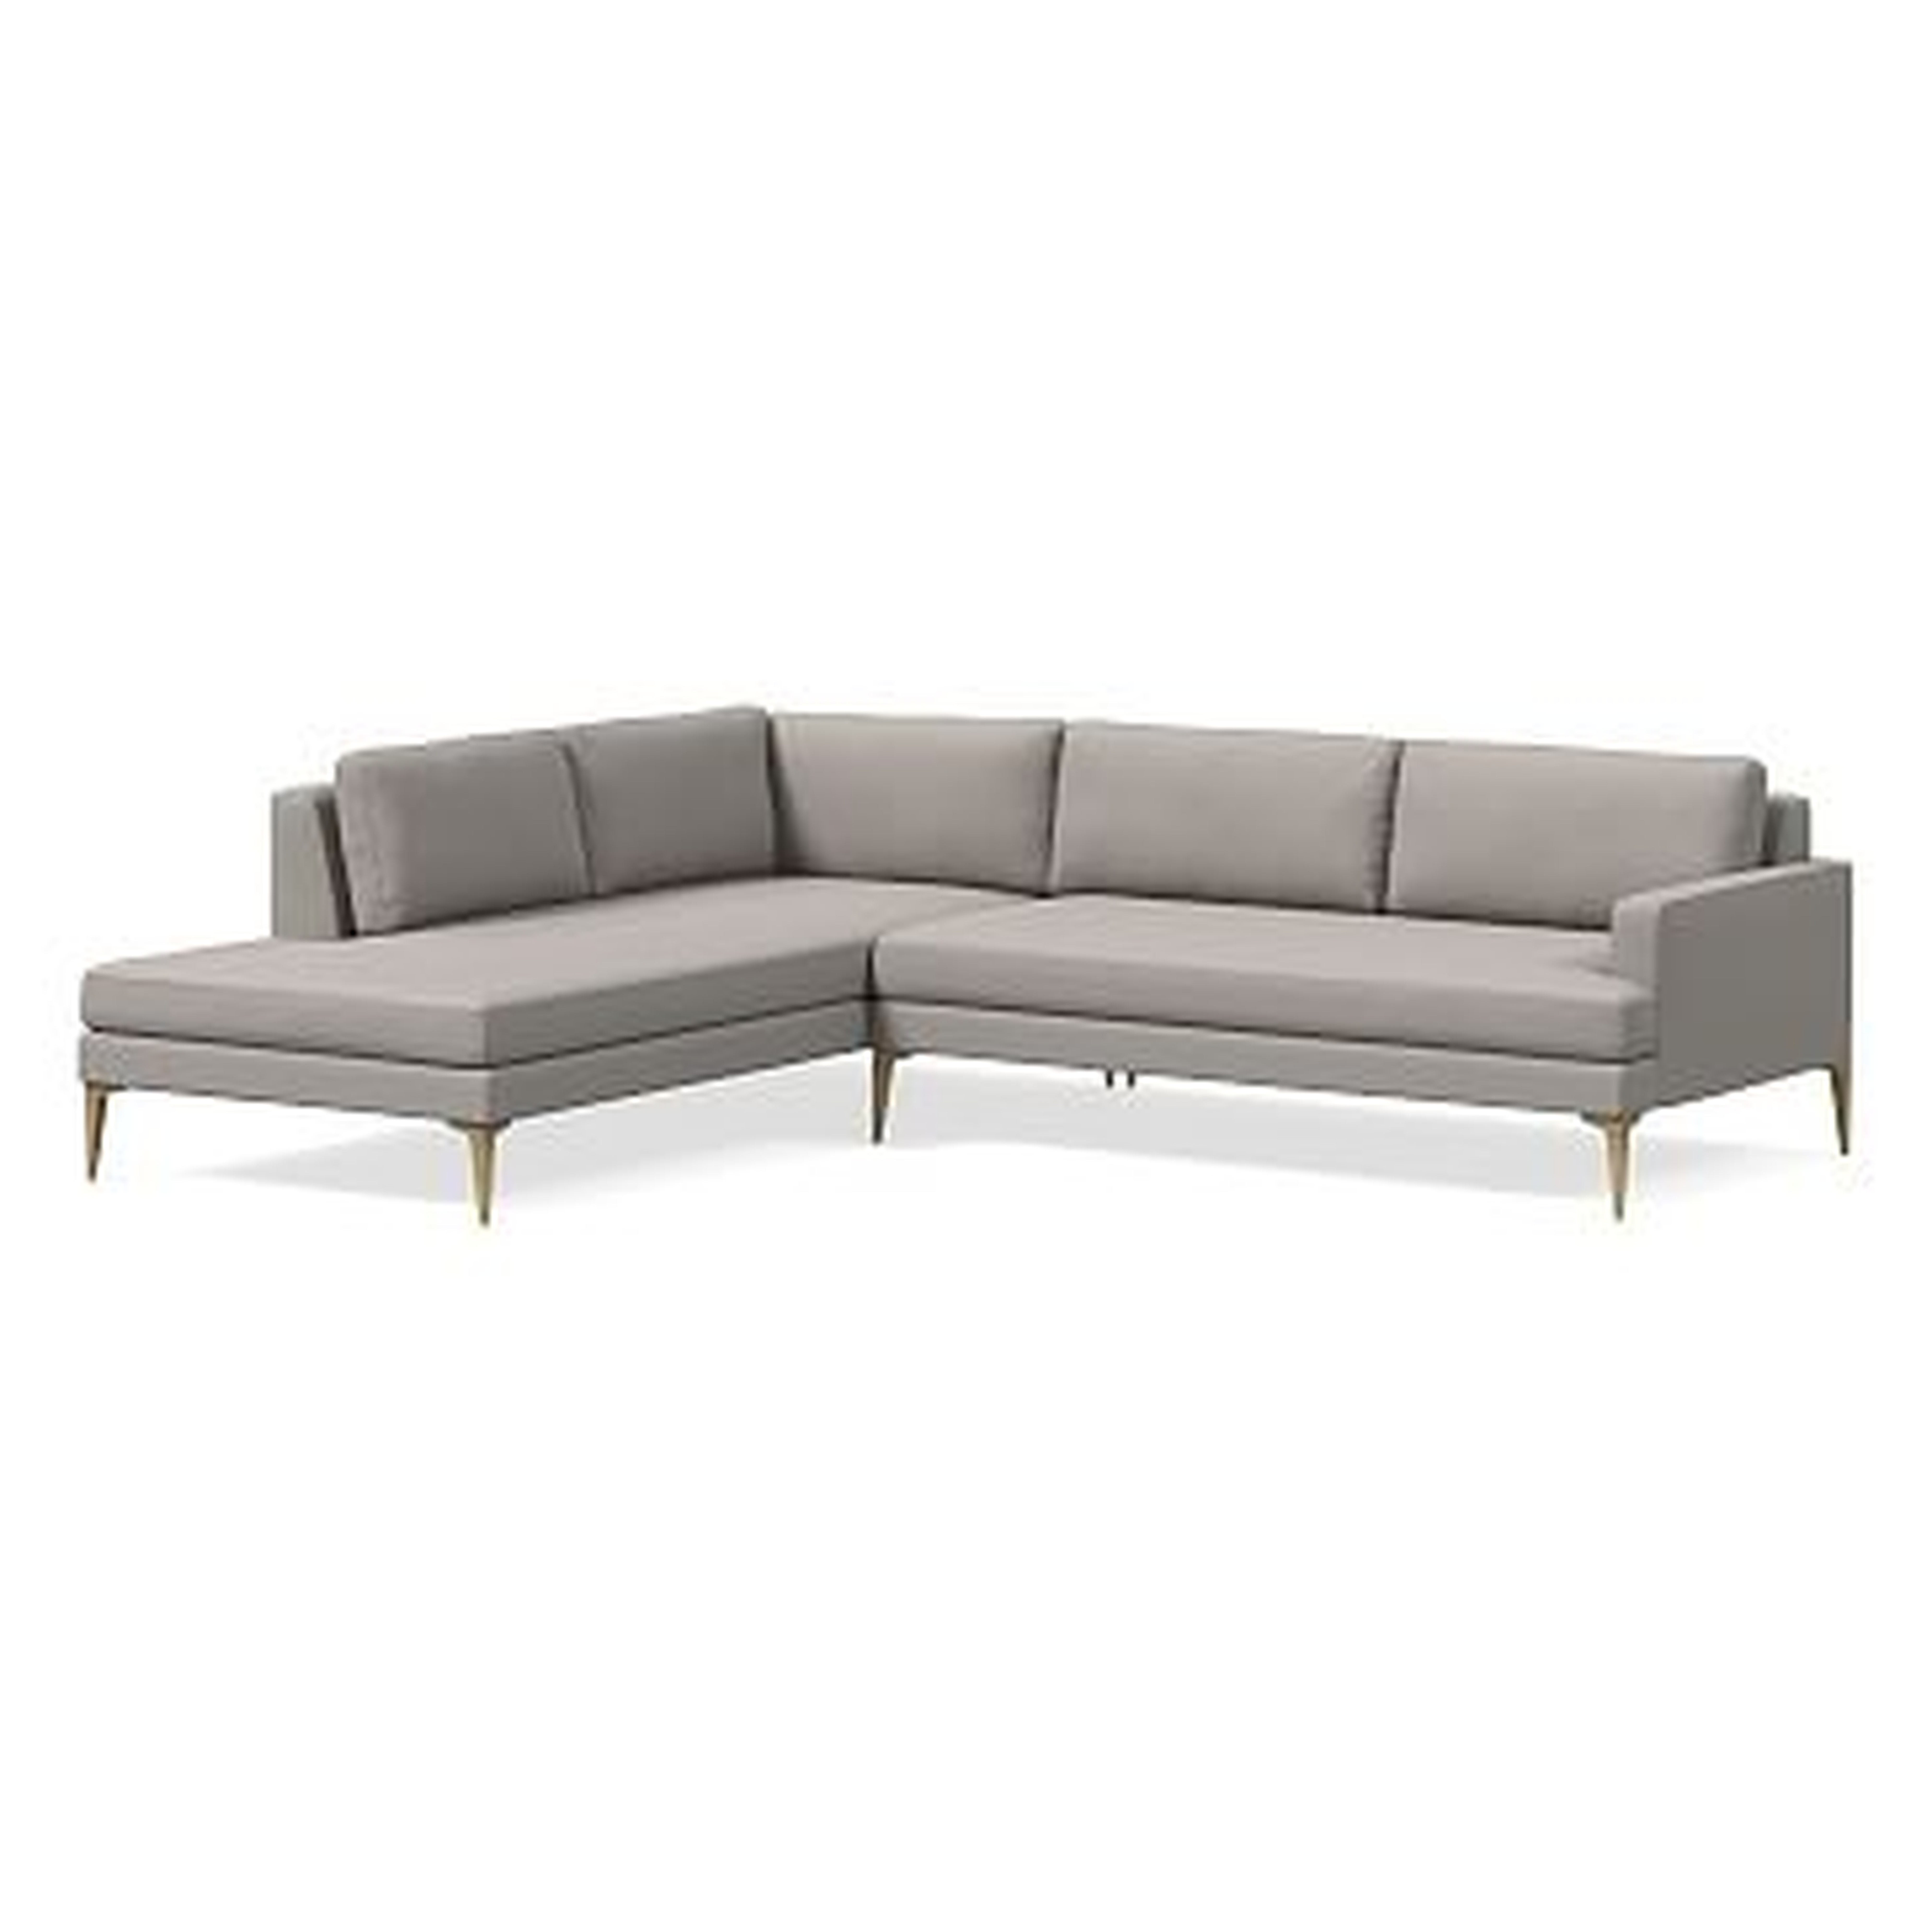 Andes Sectional Set 14: Right Arm 2.5 Seater Sofa, Left Arm Terminal Chaise, Poly , Performance Velvet, Silver, Blackened Brass - West Elm